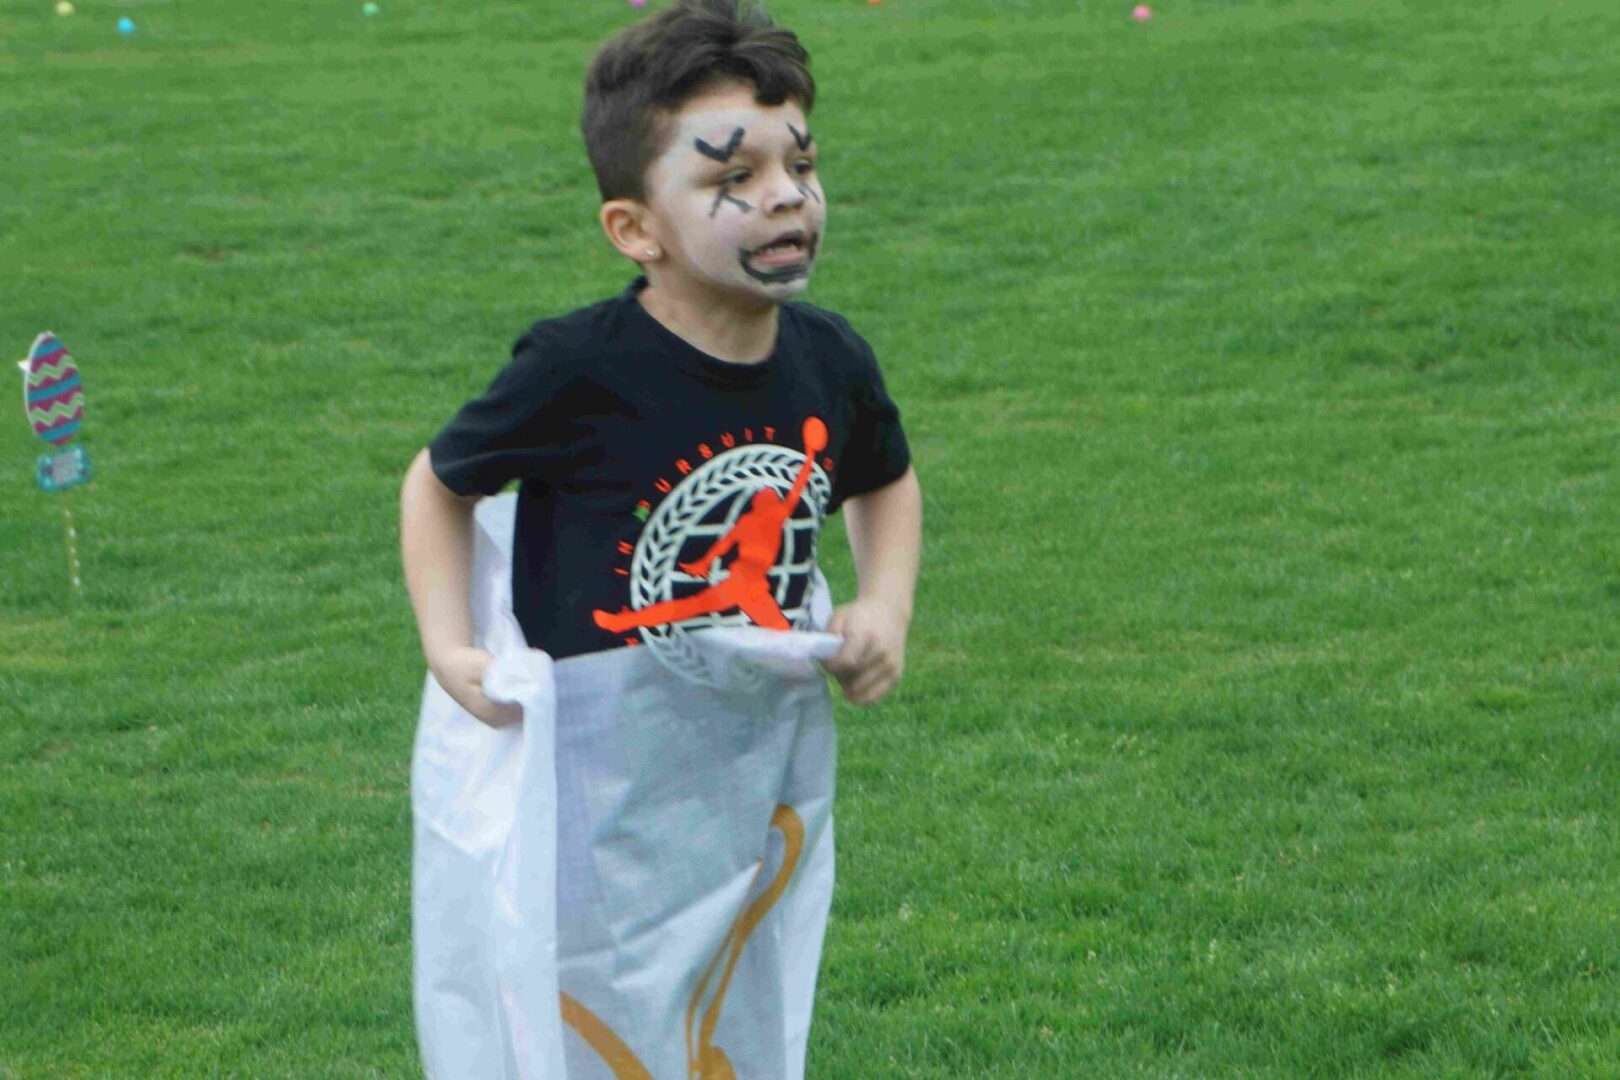 A boy in black shirt and face paint playing in a sack race